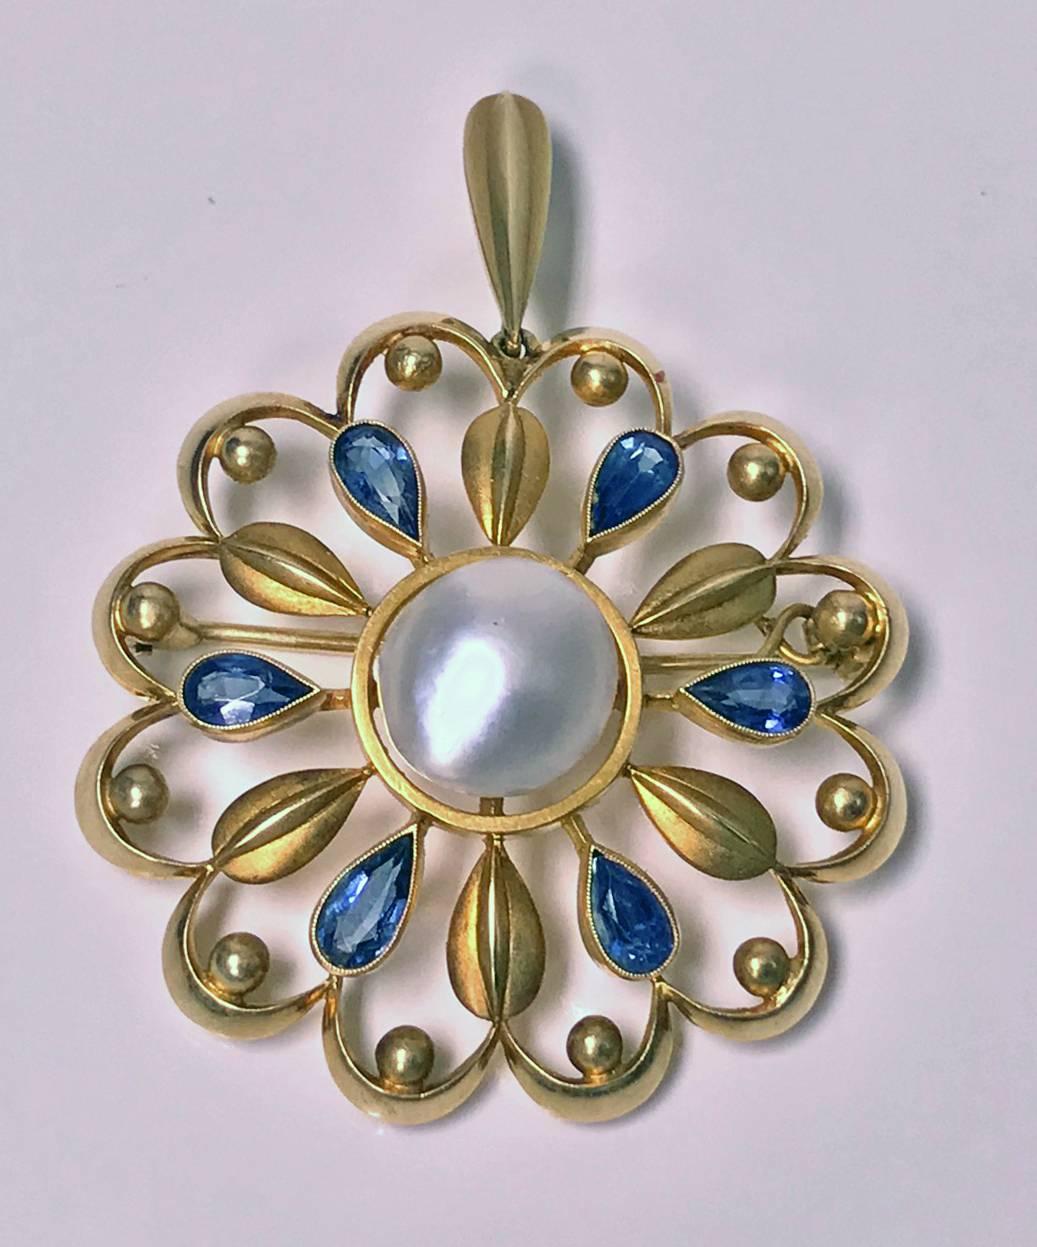 Very Rare David Andersen 14K Gold Pearl Sapphire Necklace, Brooch and Earrings, C.1950. Custom made open foliate design set with alternate blue sapphire, polished gold and matte petals with bead surround, earrings conforming in design, oval